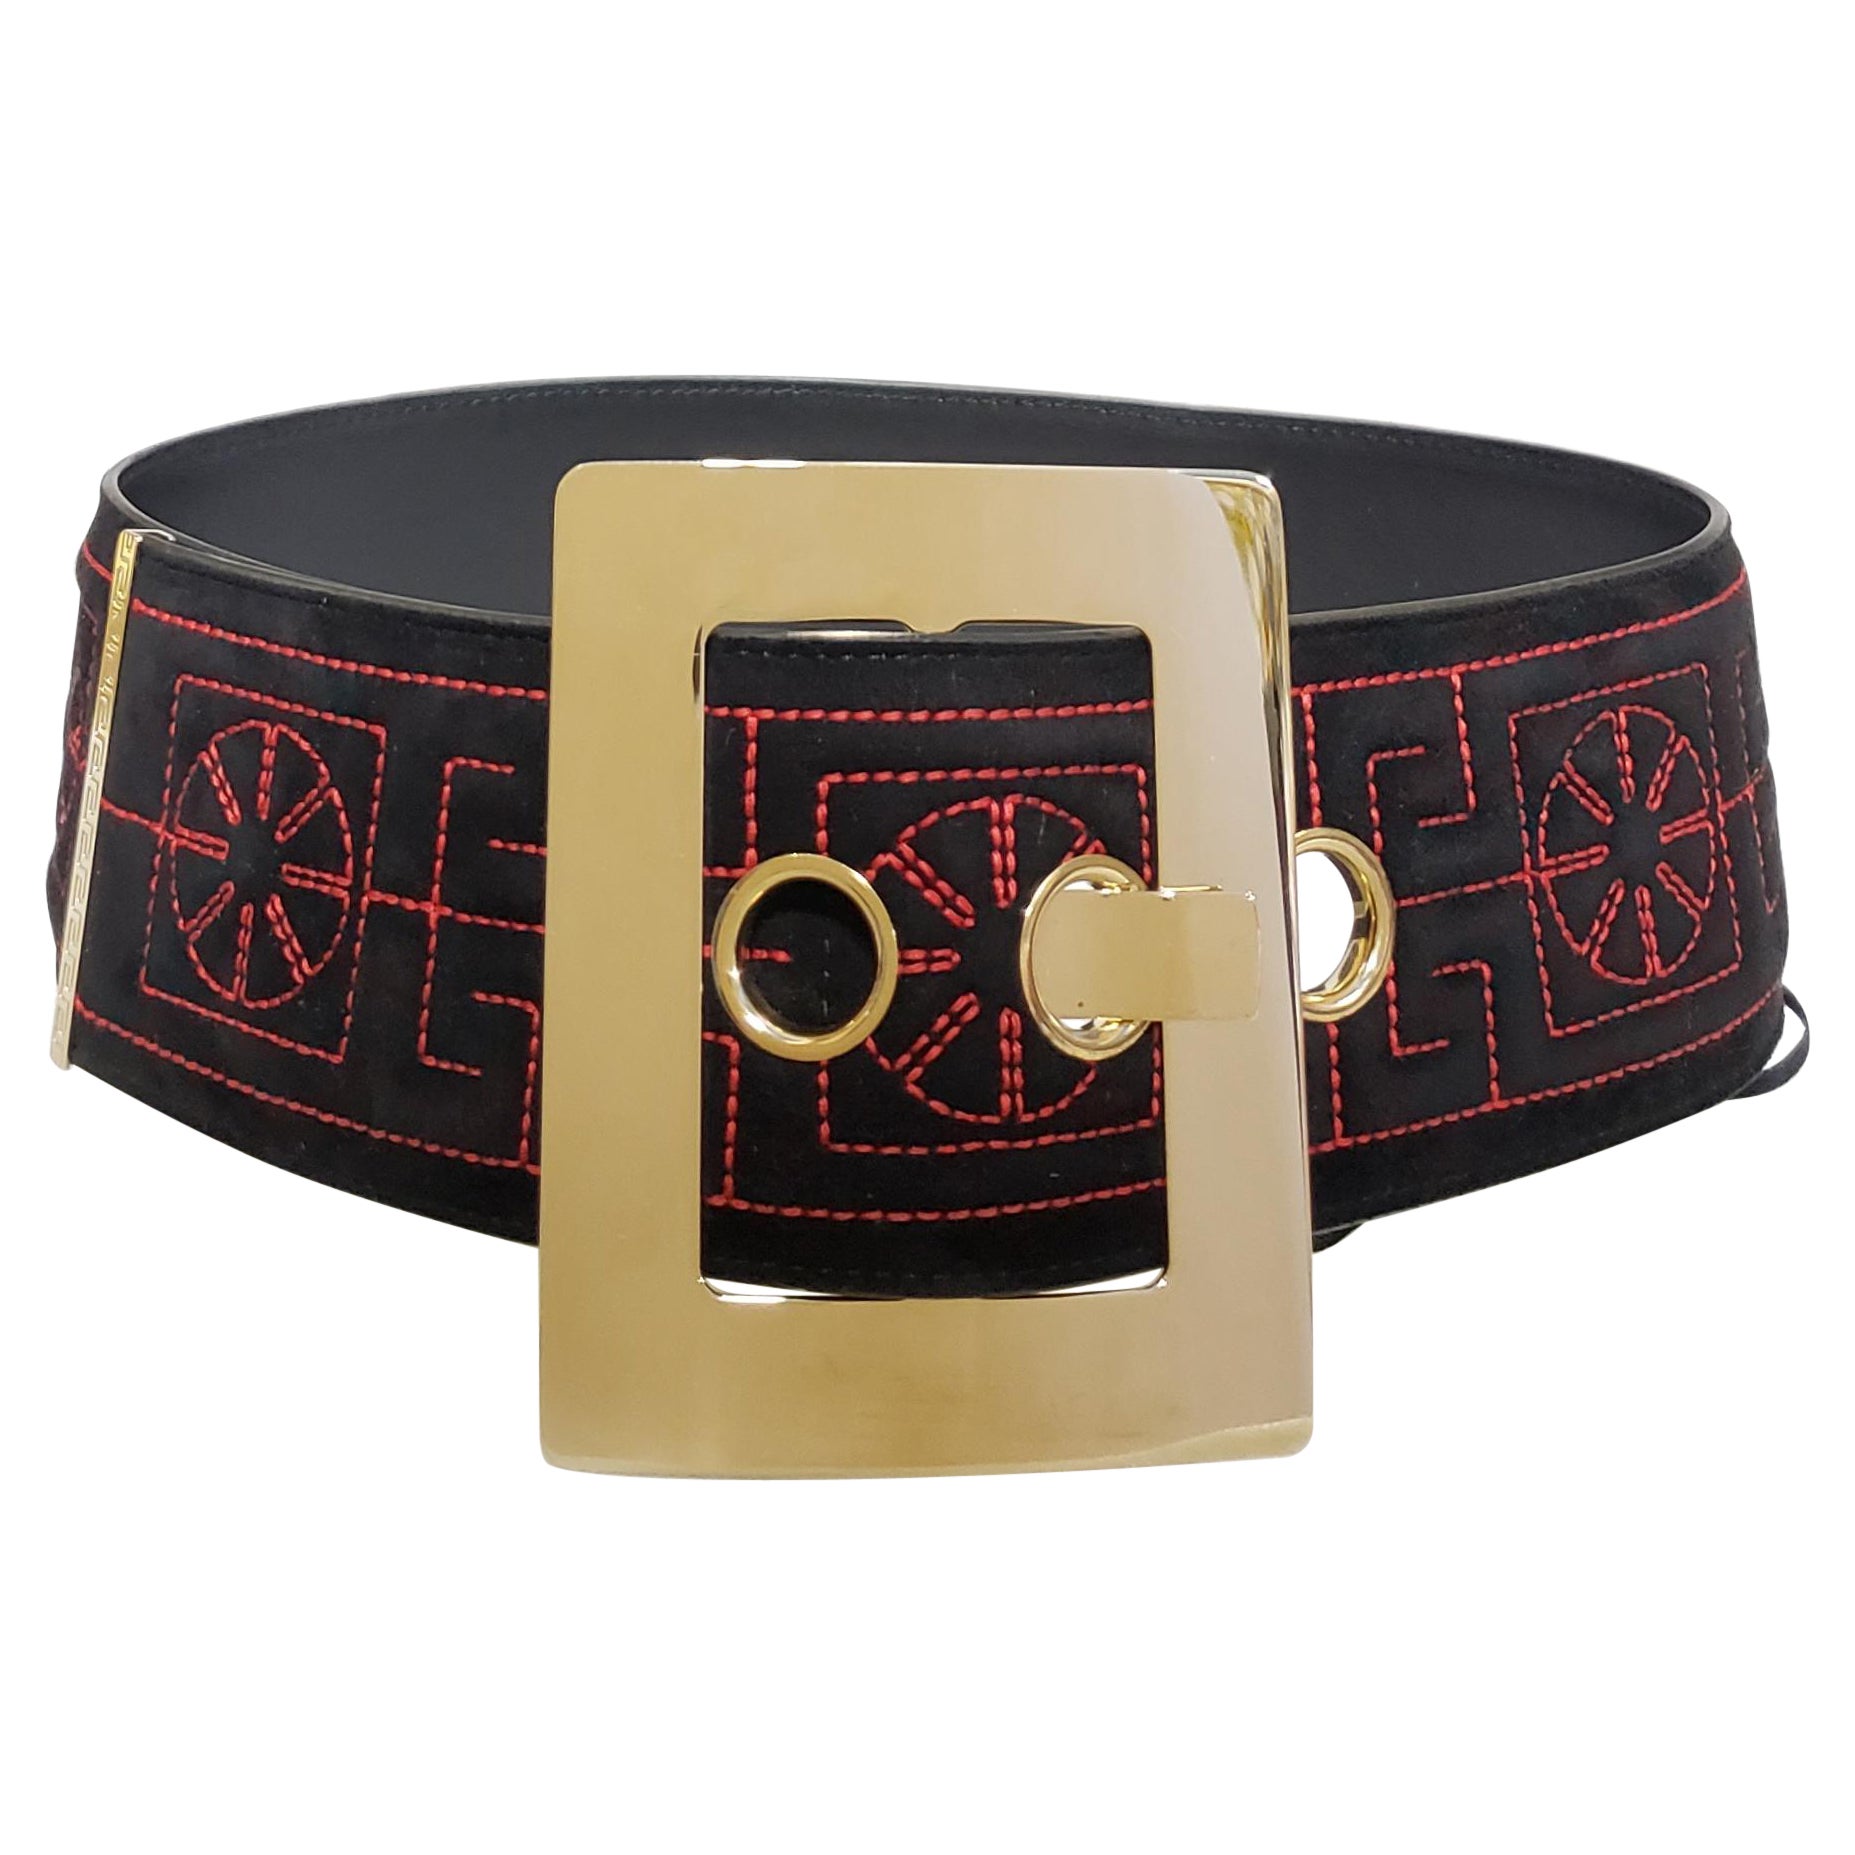 F/2015 LOOK#1 NEW VERSACE BLACK w/RED EMBROIDERED GREEK SUEDE BELT 70/28 For Sale